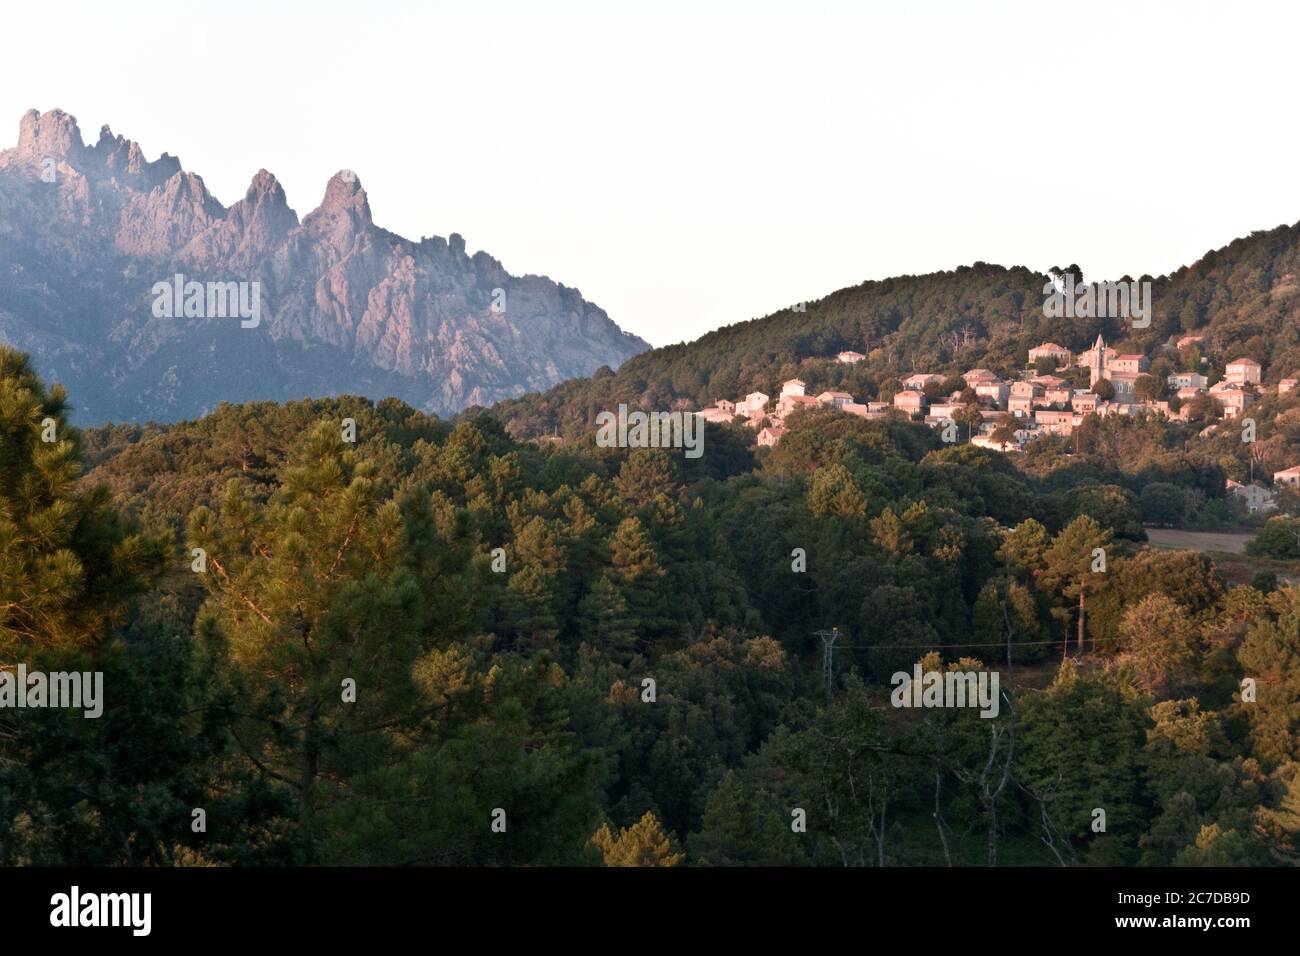 The serrated peaks of the Aiguilles de Bavella and the village of Zonza, in the southern Alta Rocca region of Corsica, France. Stock Photo